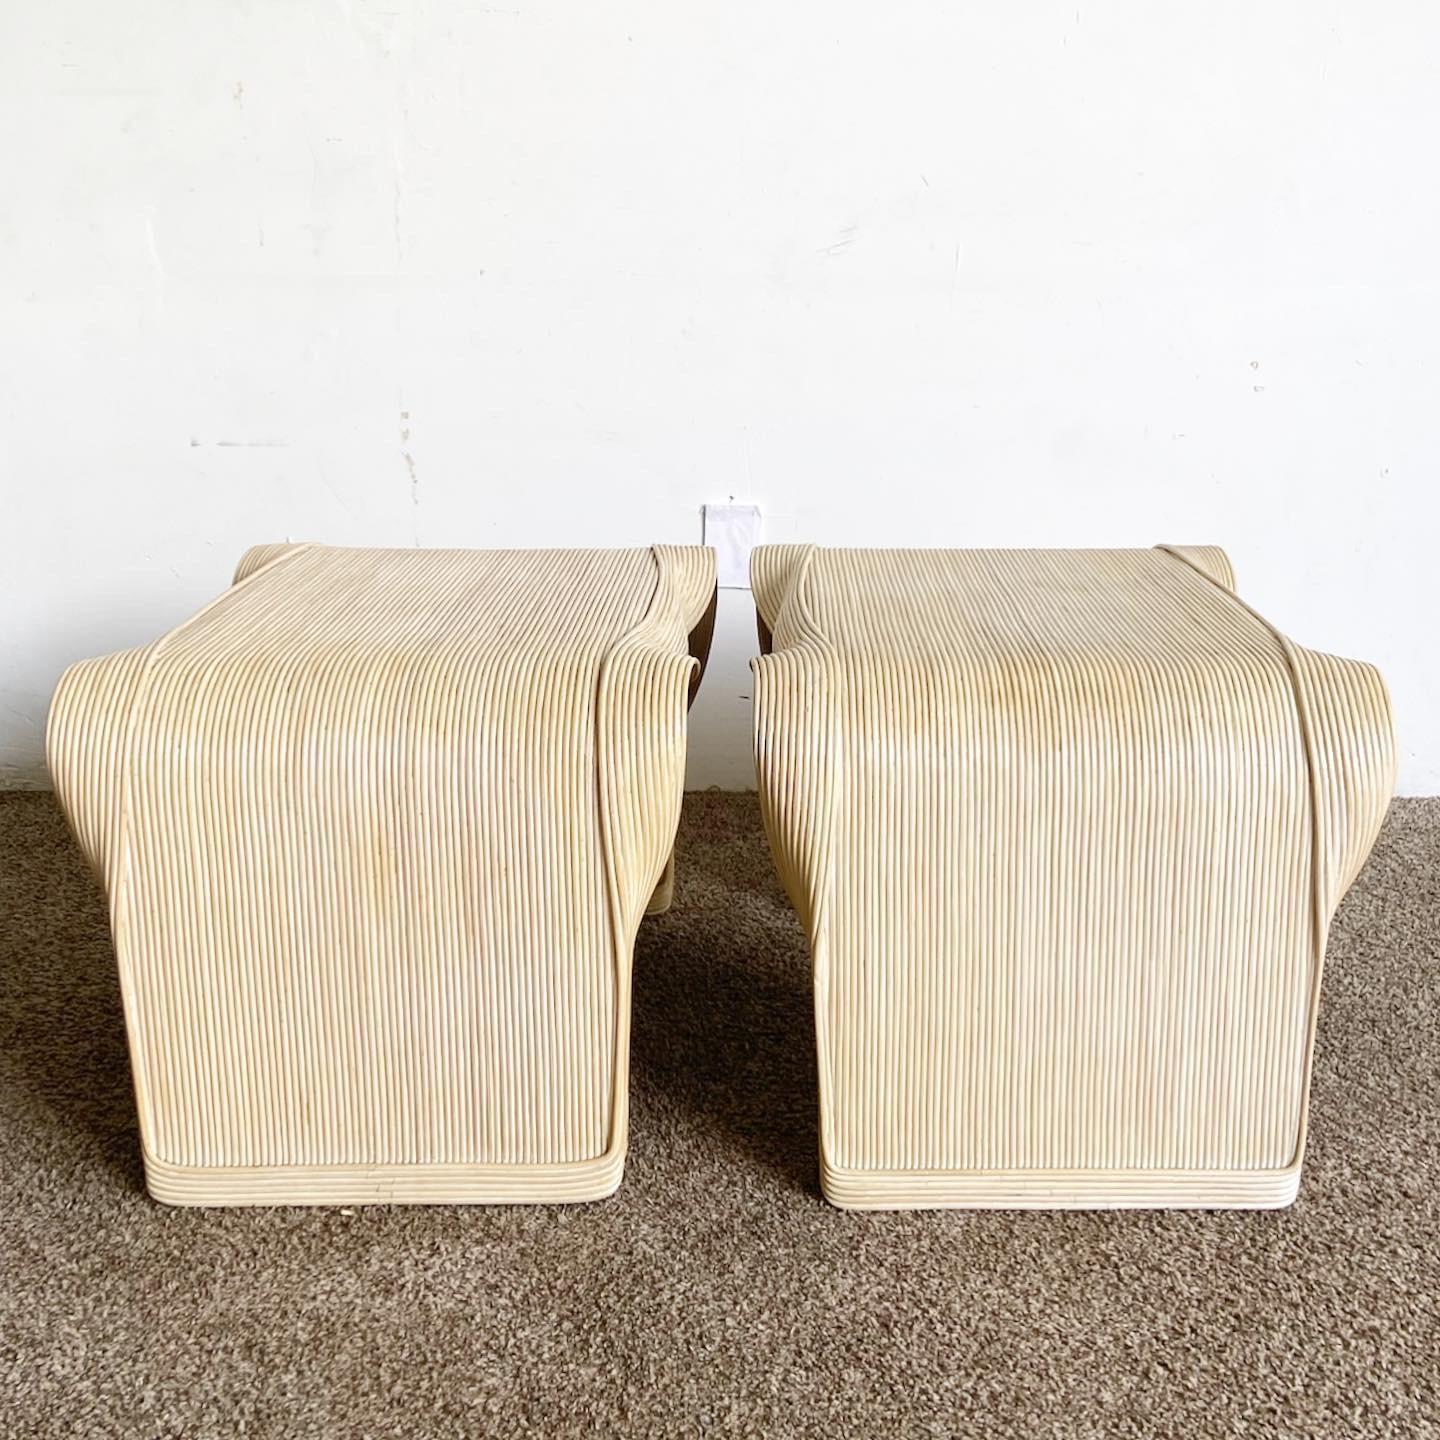 Philippine Boho Chic Wavy Ribbon Pencil Reed Side Tables - a Pair For Sale